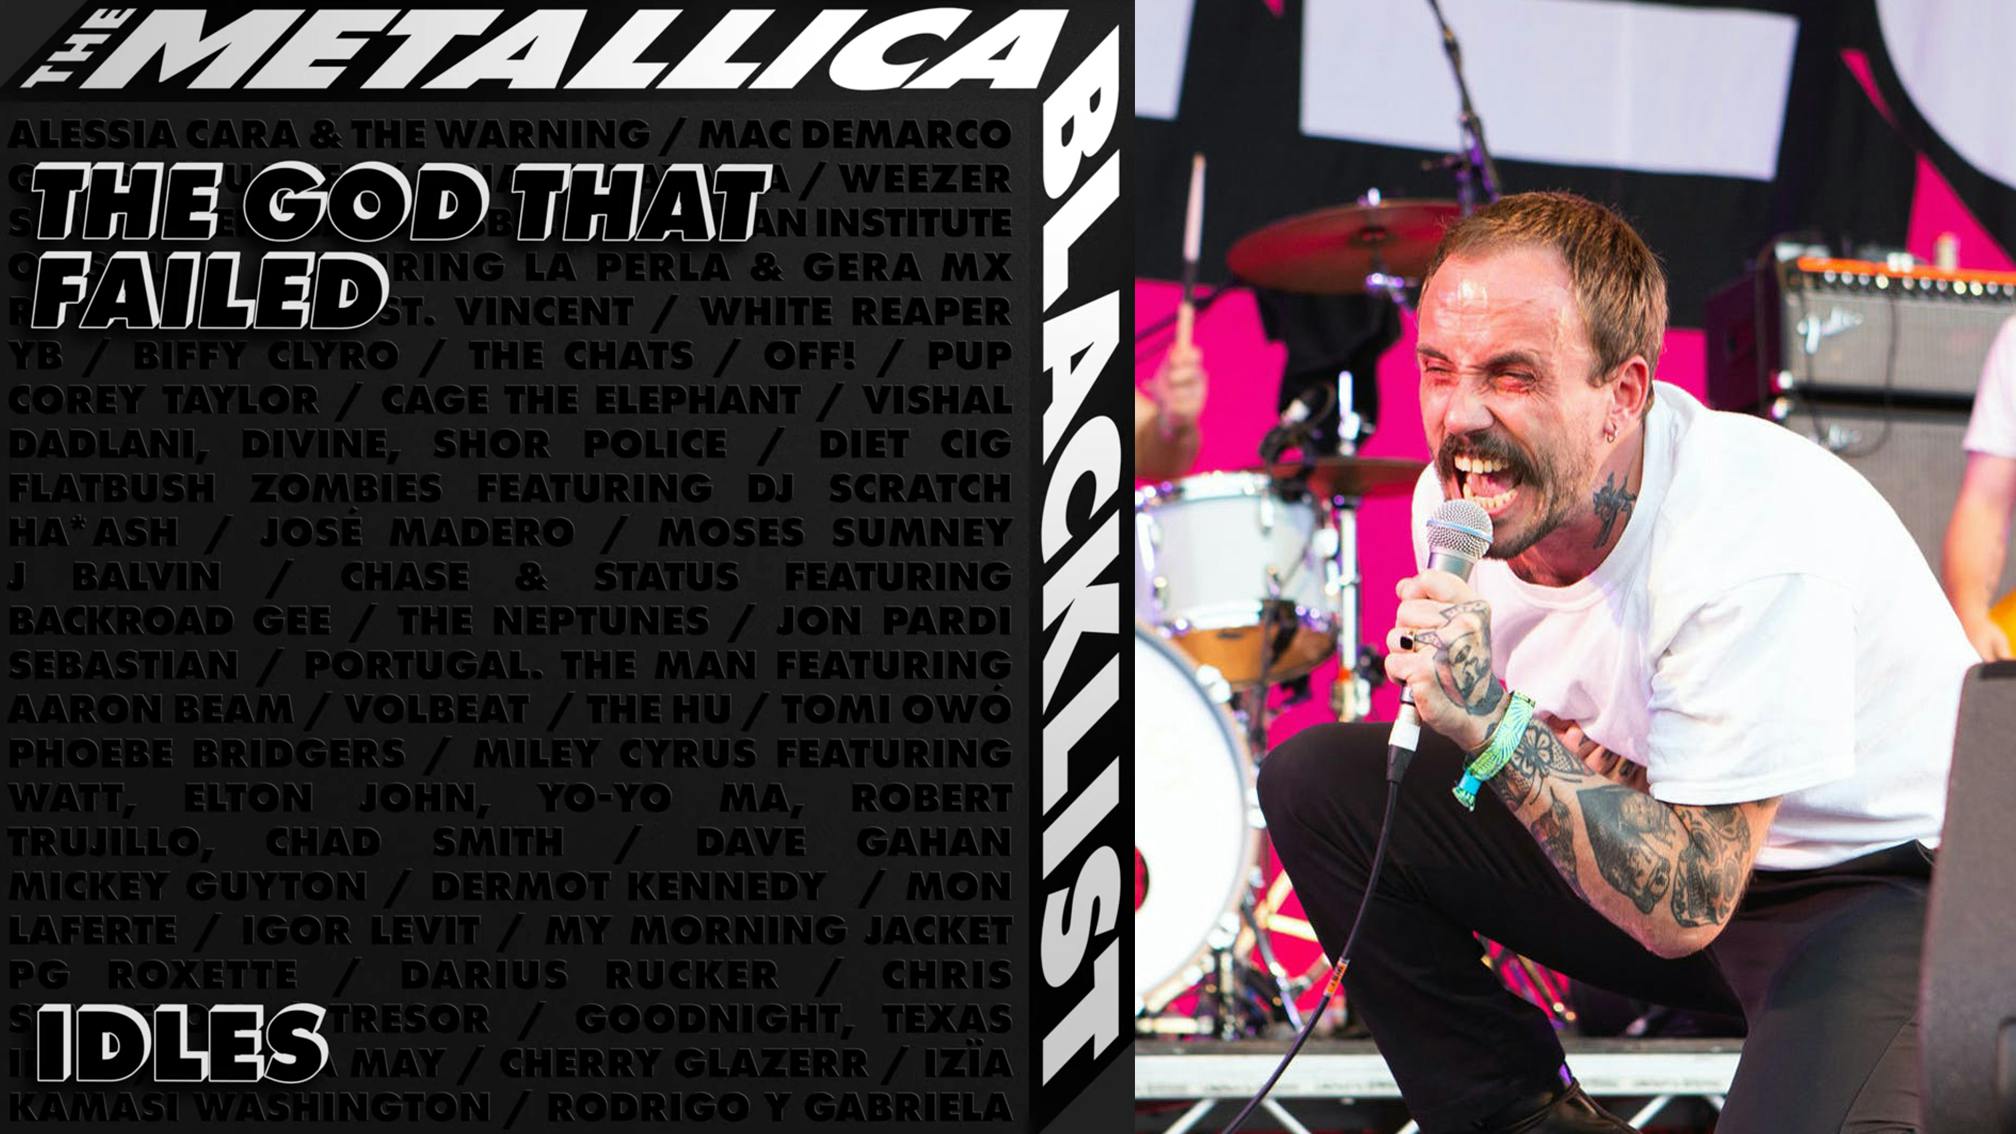 IDLES add their own unique spin to Metallica's The God That Failed